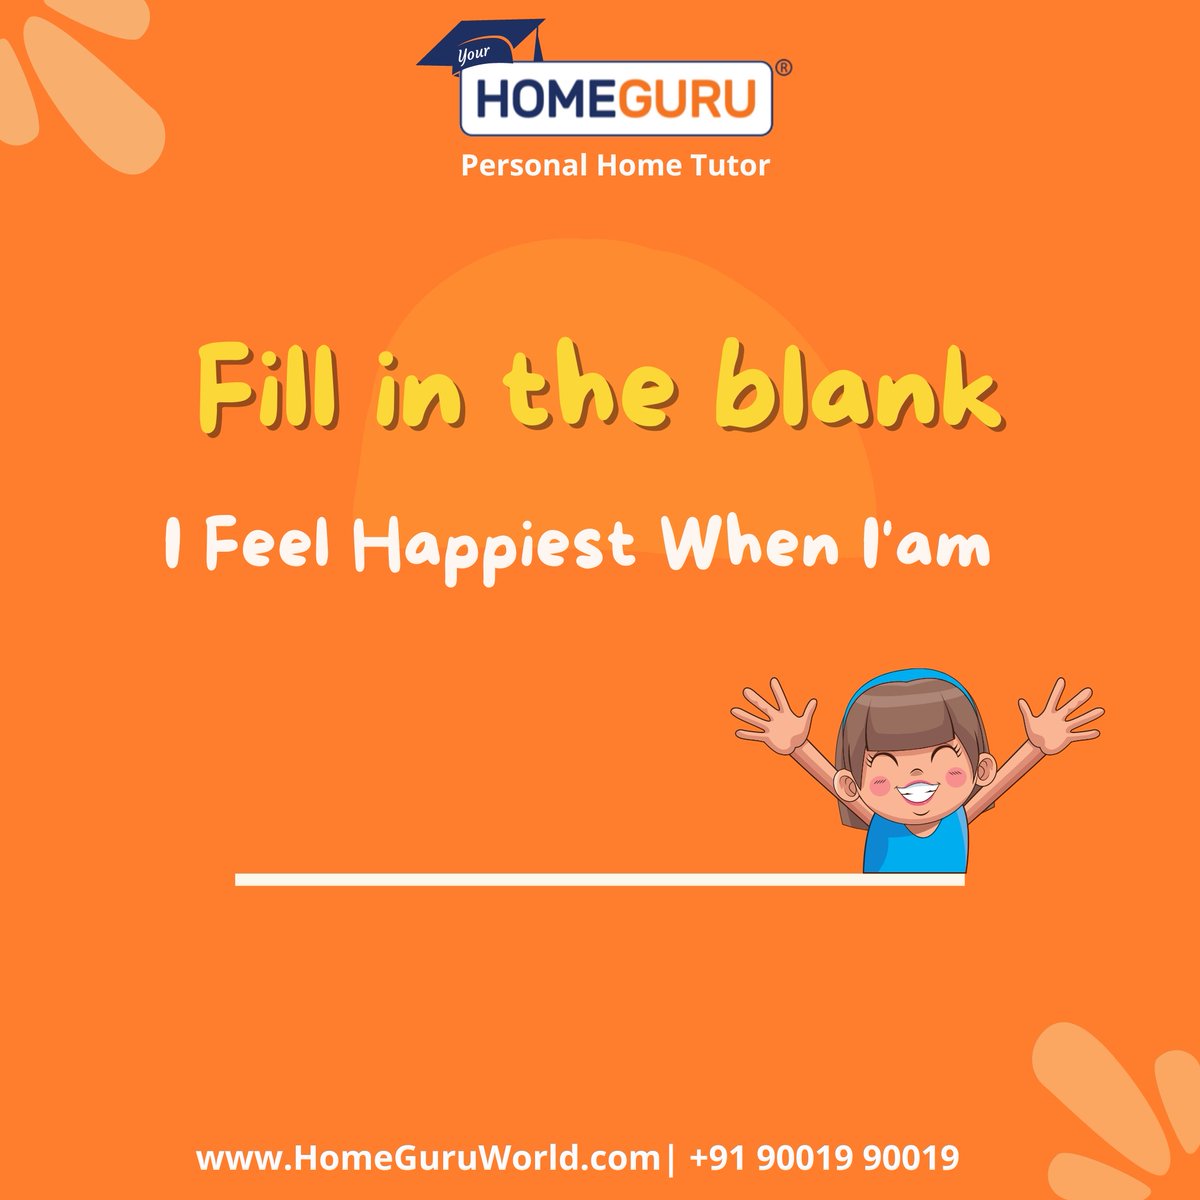 Happiness is contagious, so we want to know what makes you the happiest!😍

Comment below!

#fillintheblank #happytimes #happymemories #teacherstudent #funtimes #sciencetutor #mathsclass #gamestime #homeguruworld #chennai